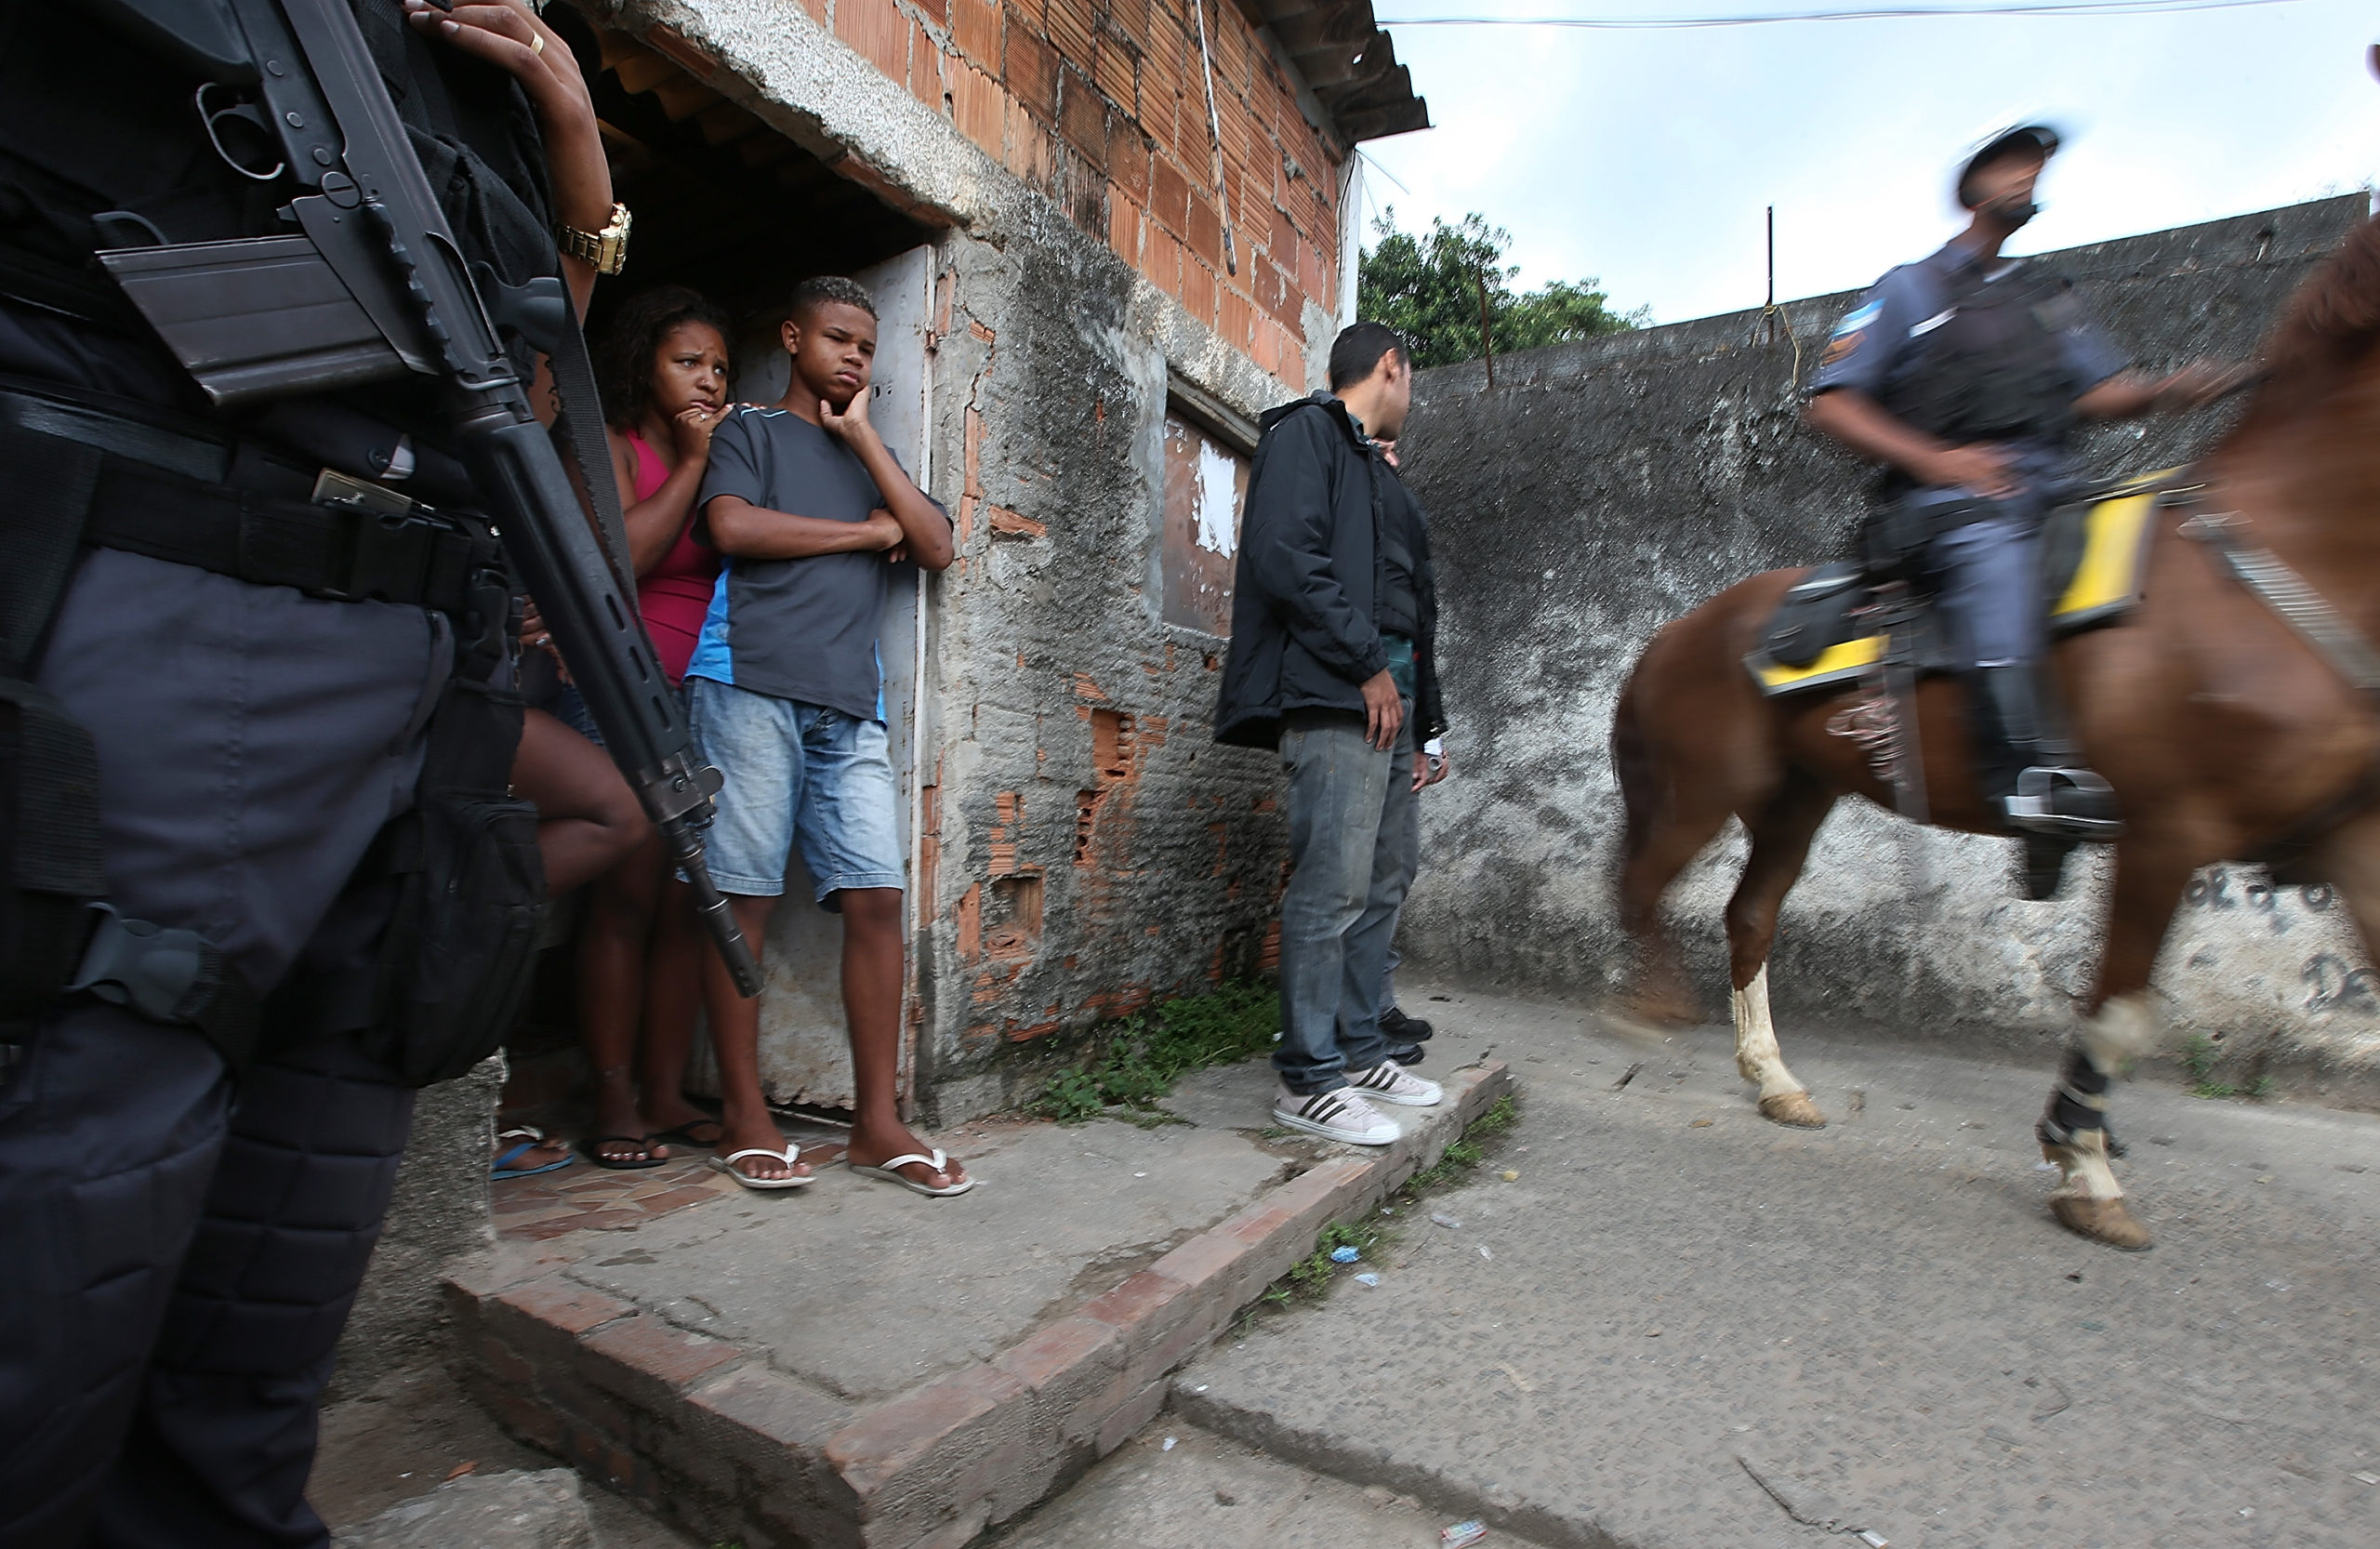 Make Way For The Olympics: The Paramilitary Clearance Of Rio’s Slums